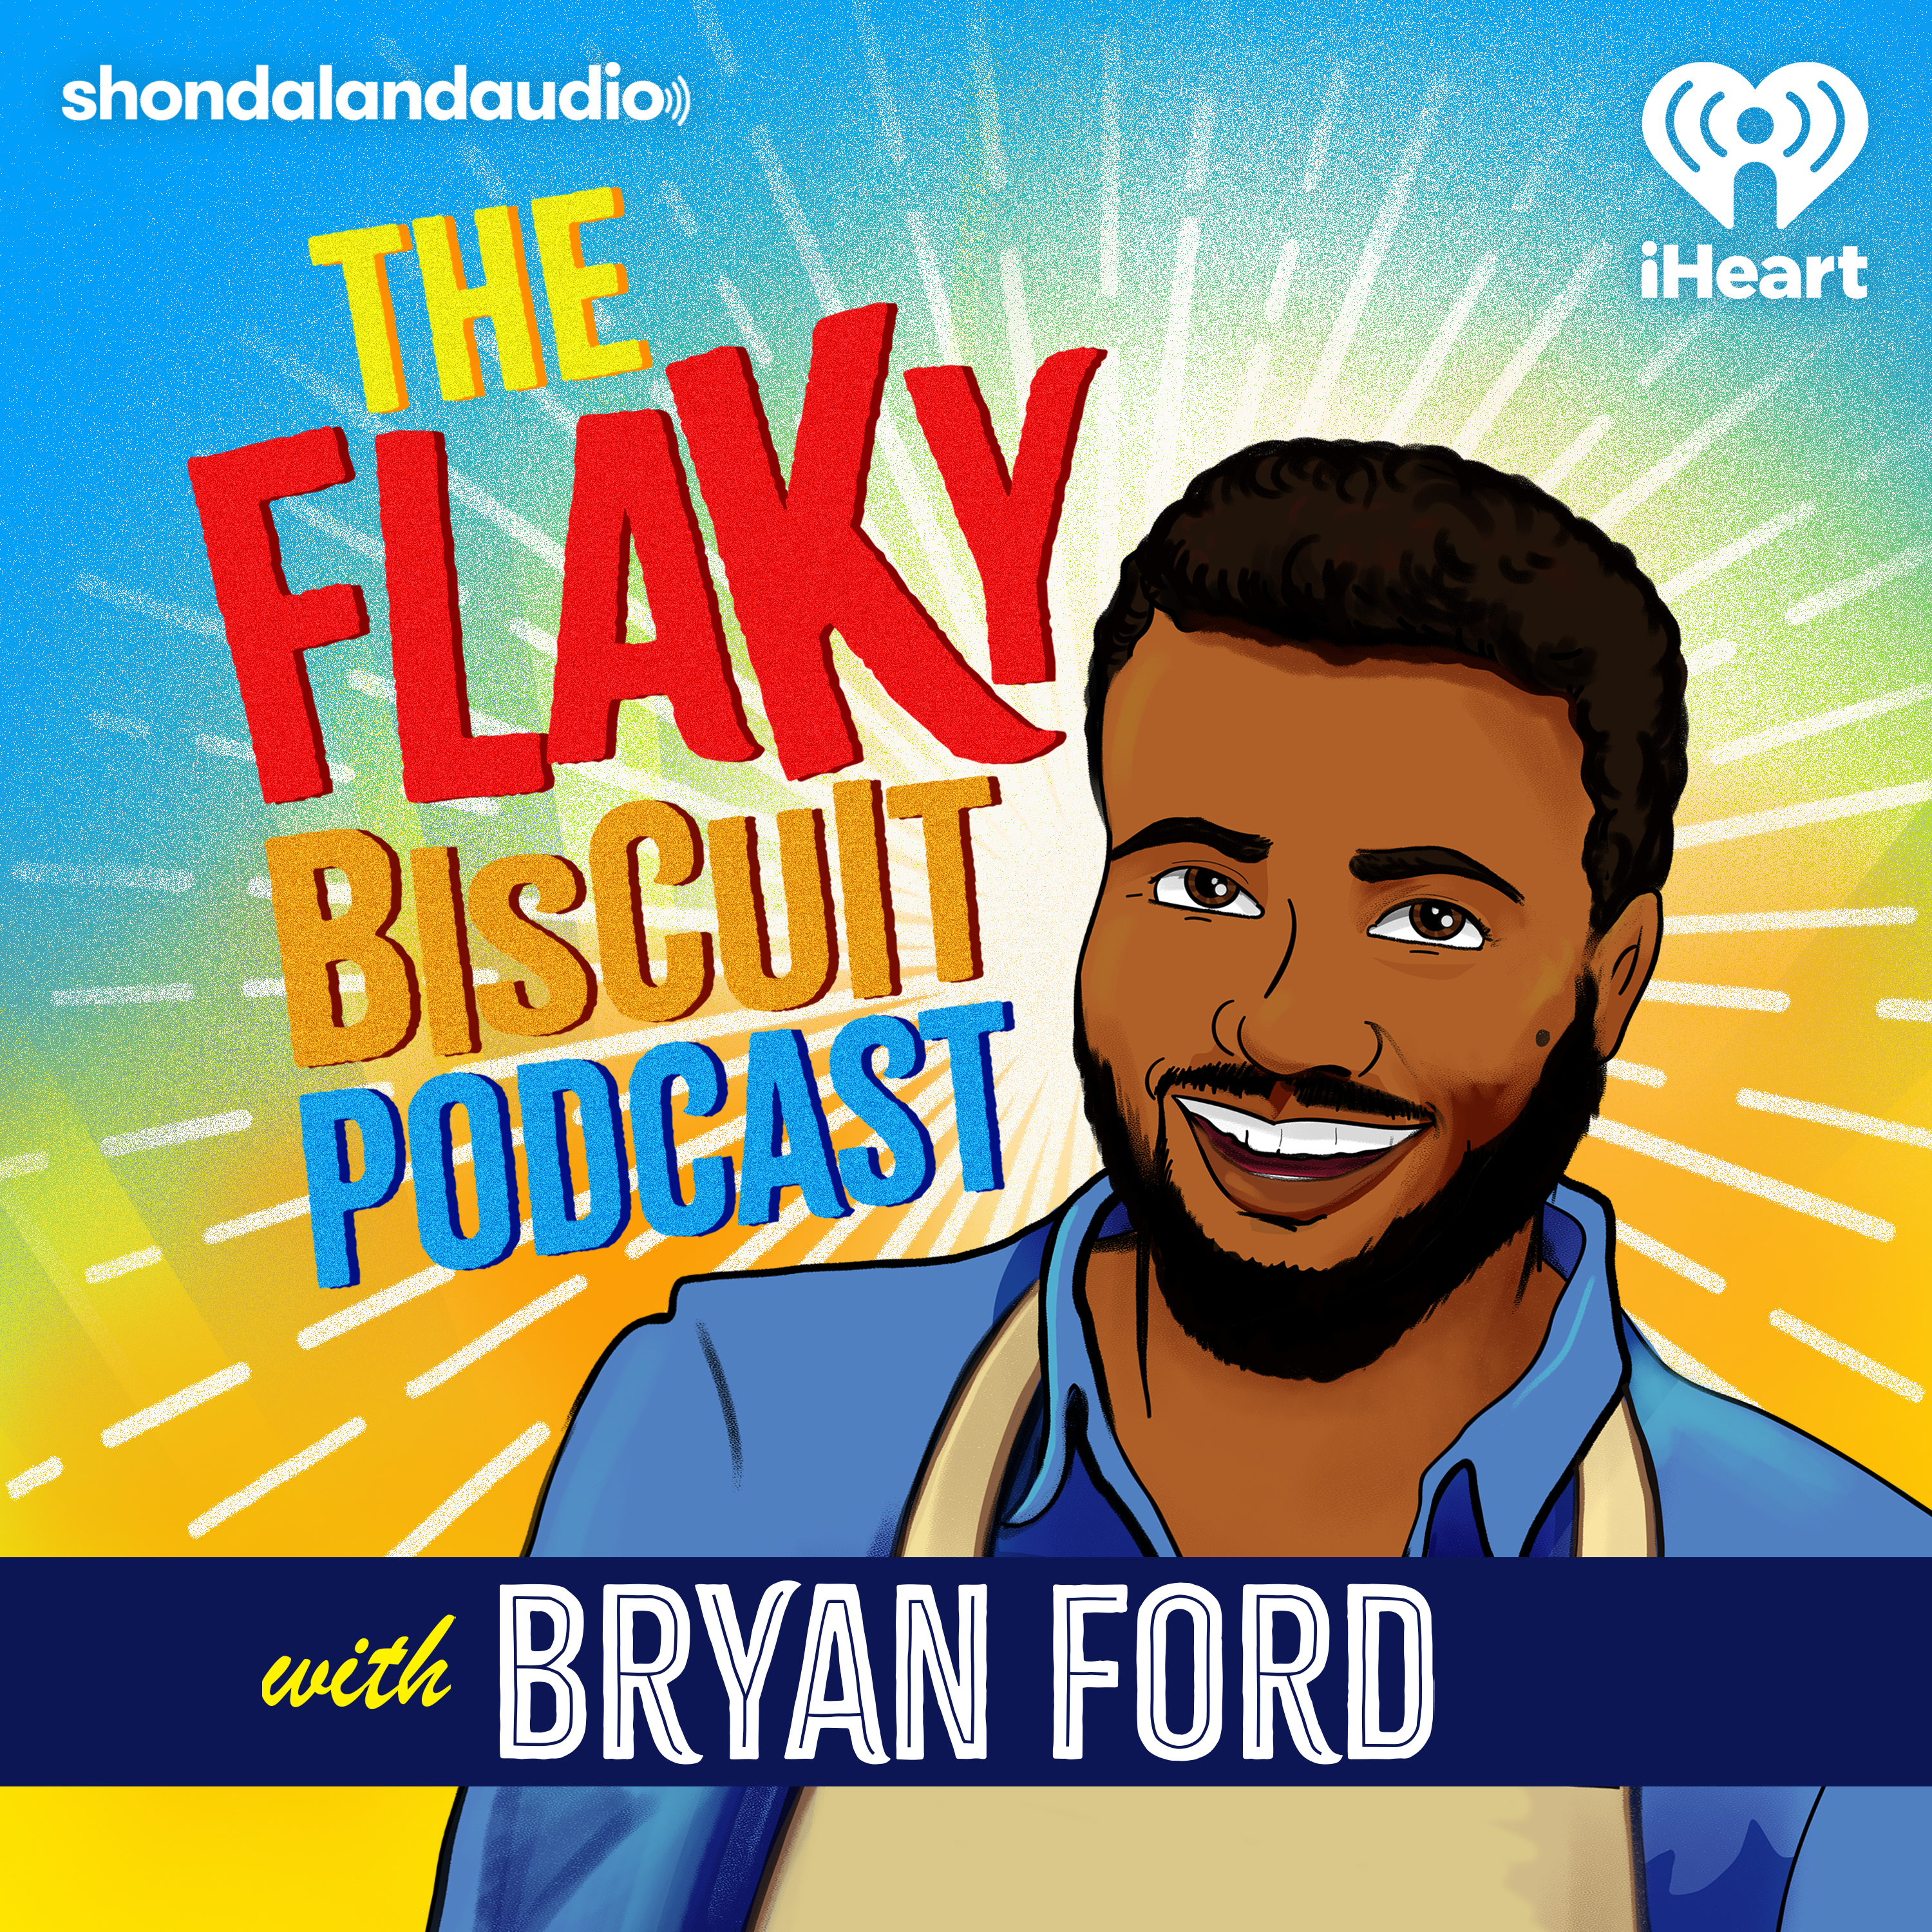 The Flaky Biscuit Podcast podcast show image